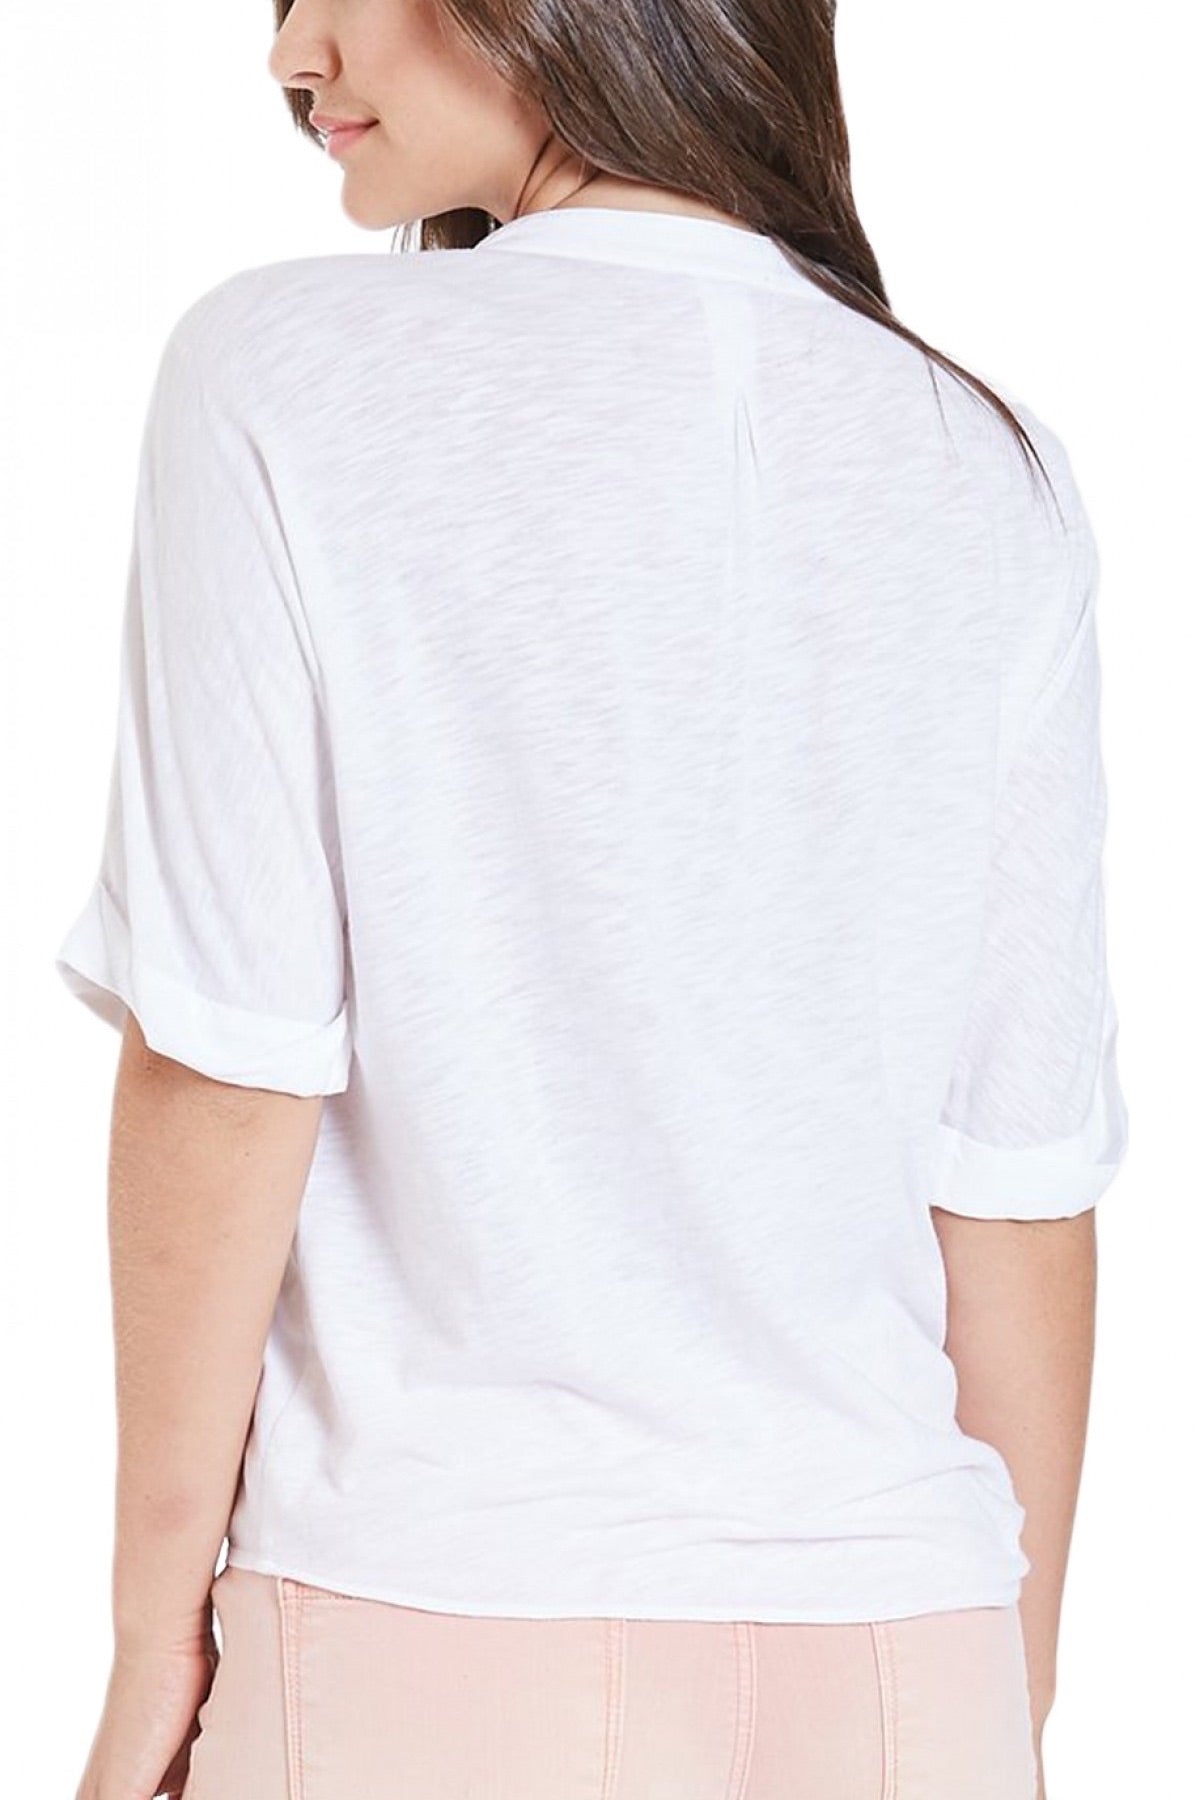 Hanna Short Sleeve Tie Front Top in White